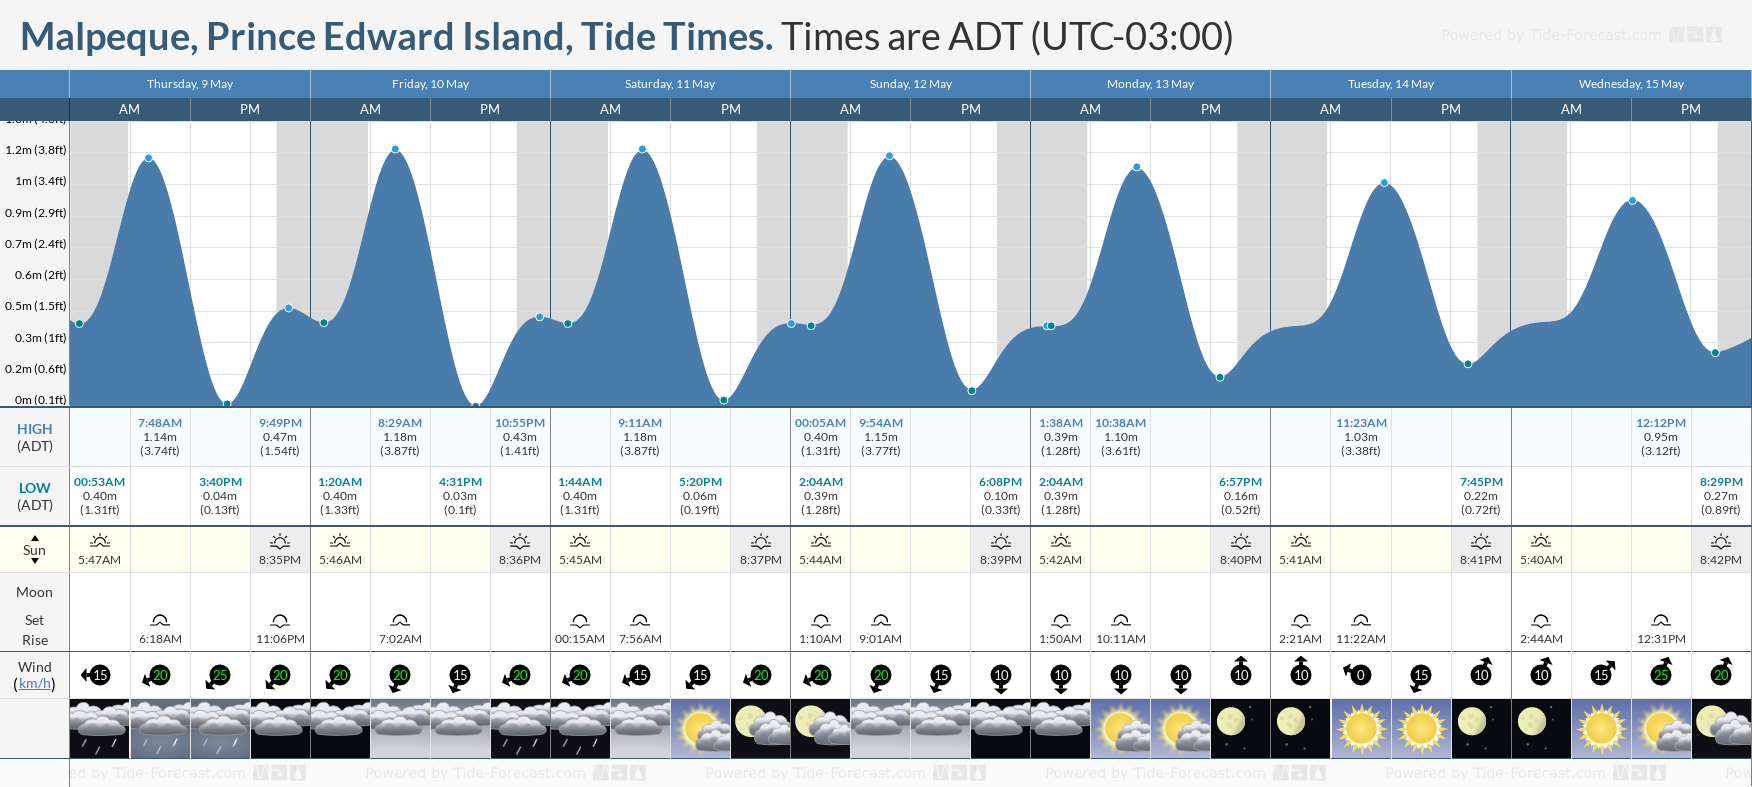 Malpeque, Prince Edward Island Tide Chart including high and low tide tide times for the next 7 days